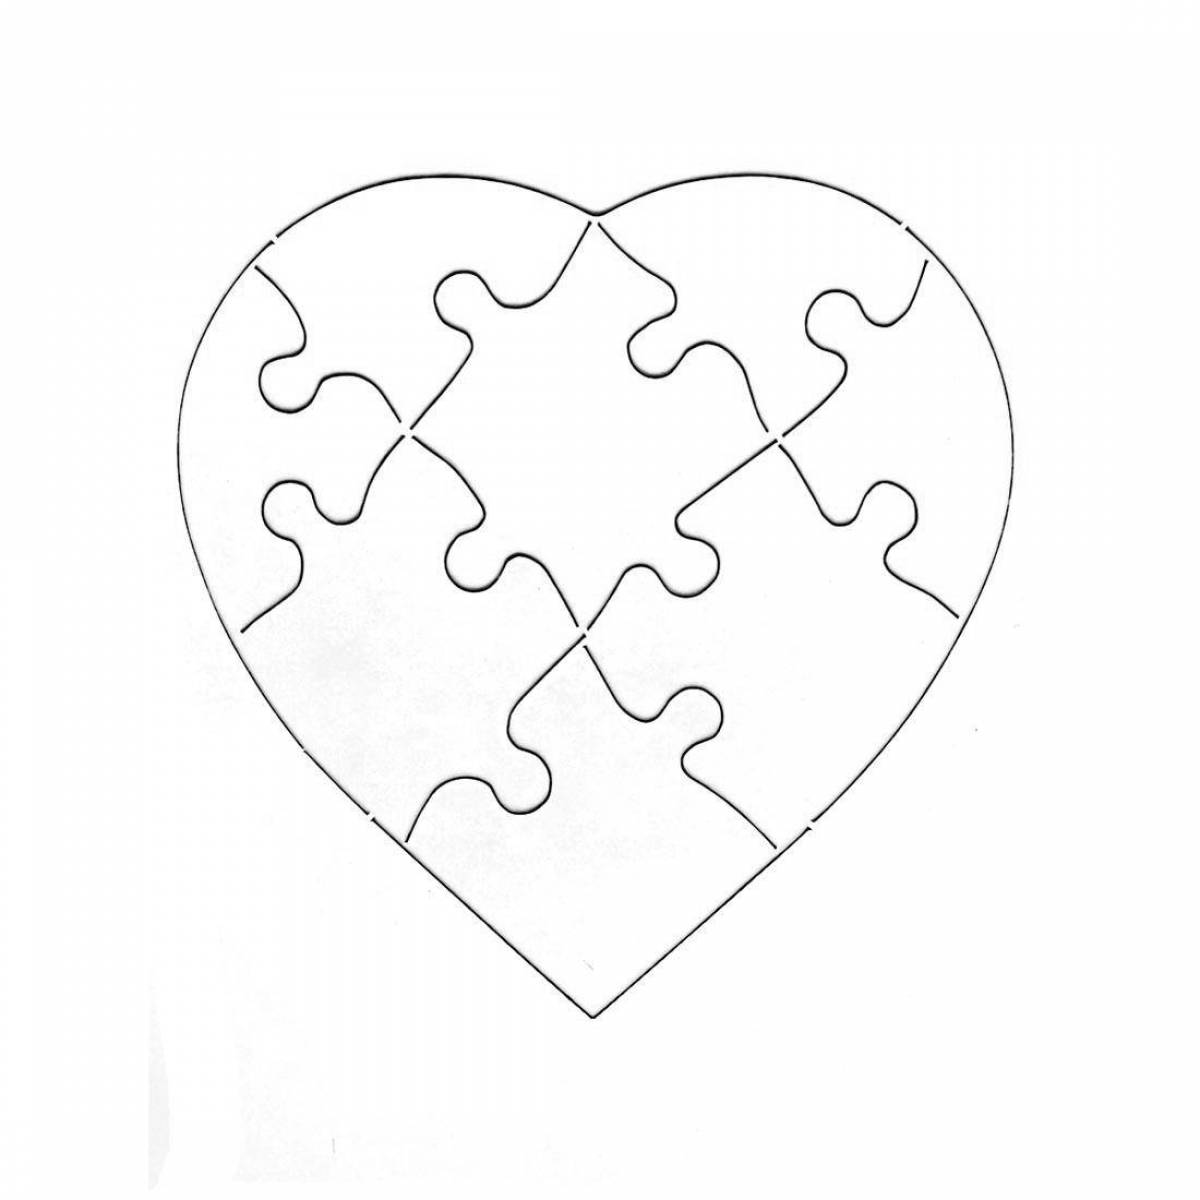 Coloring puzzle with a sparkling heart